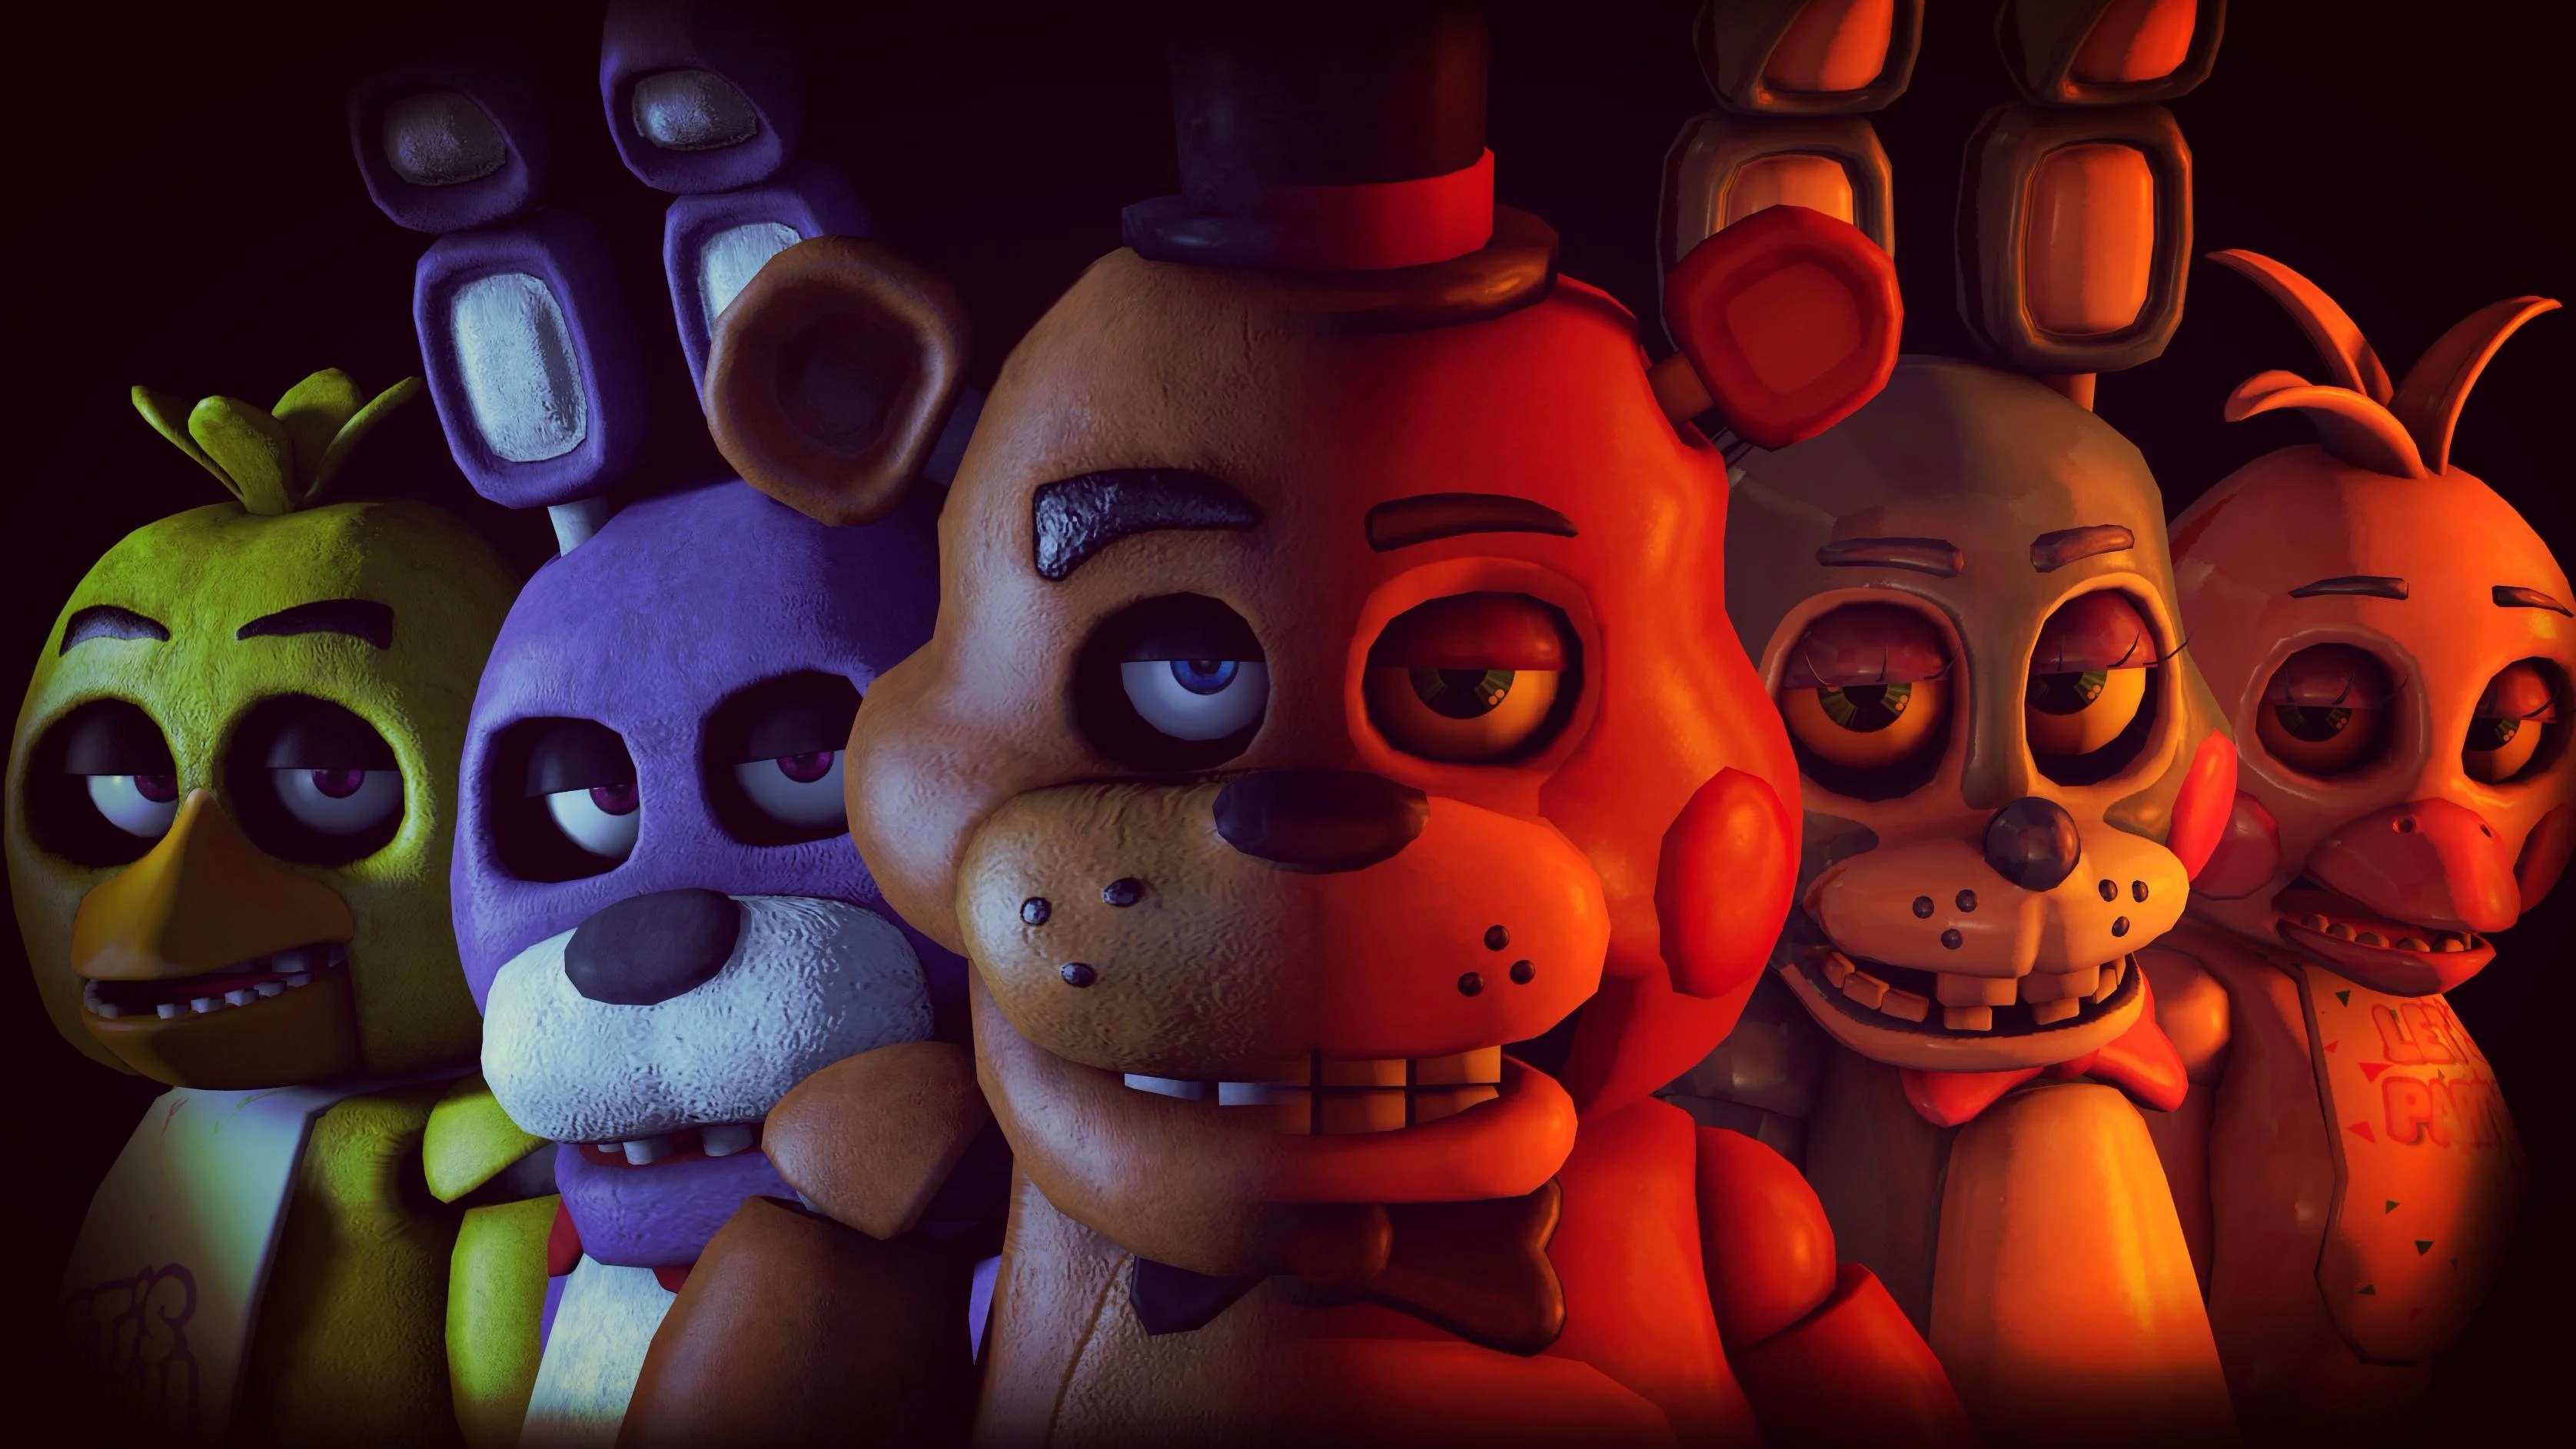 The second part of Five Nights at Freddy's will begin filming in July.